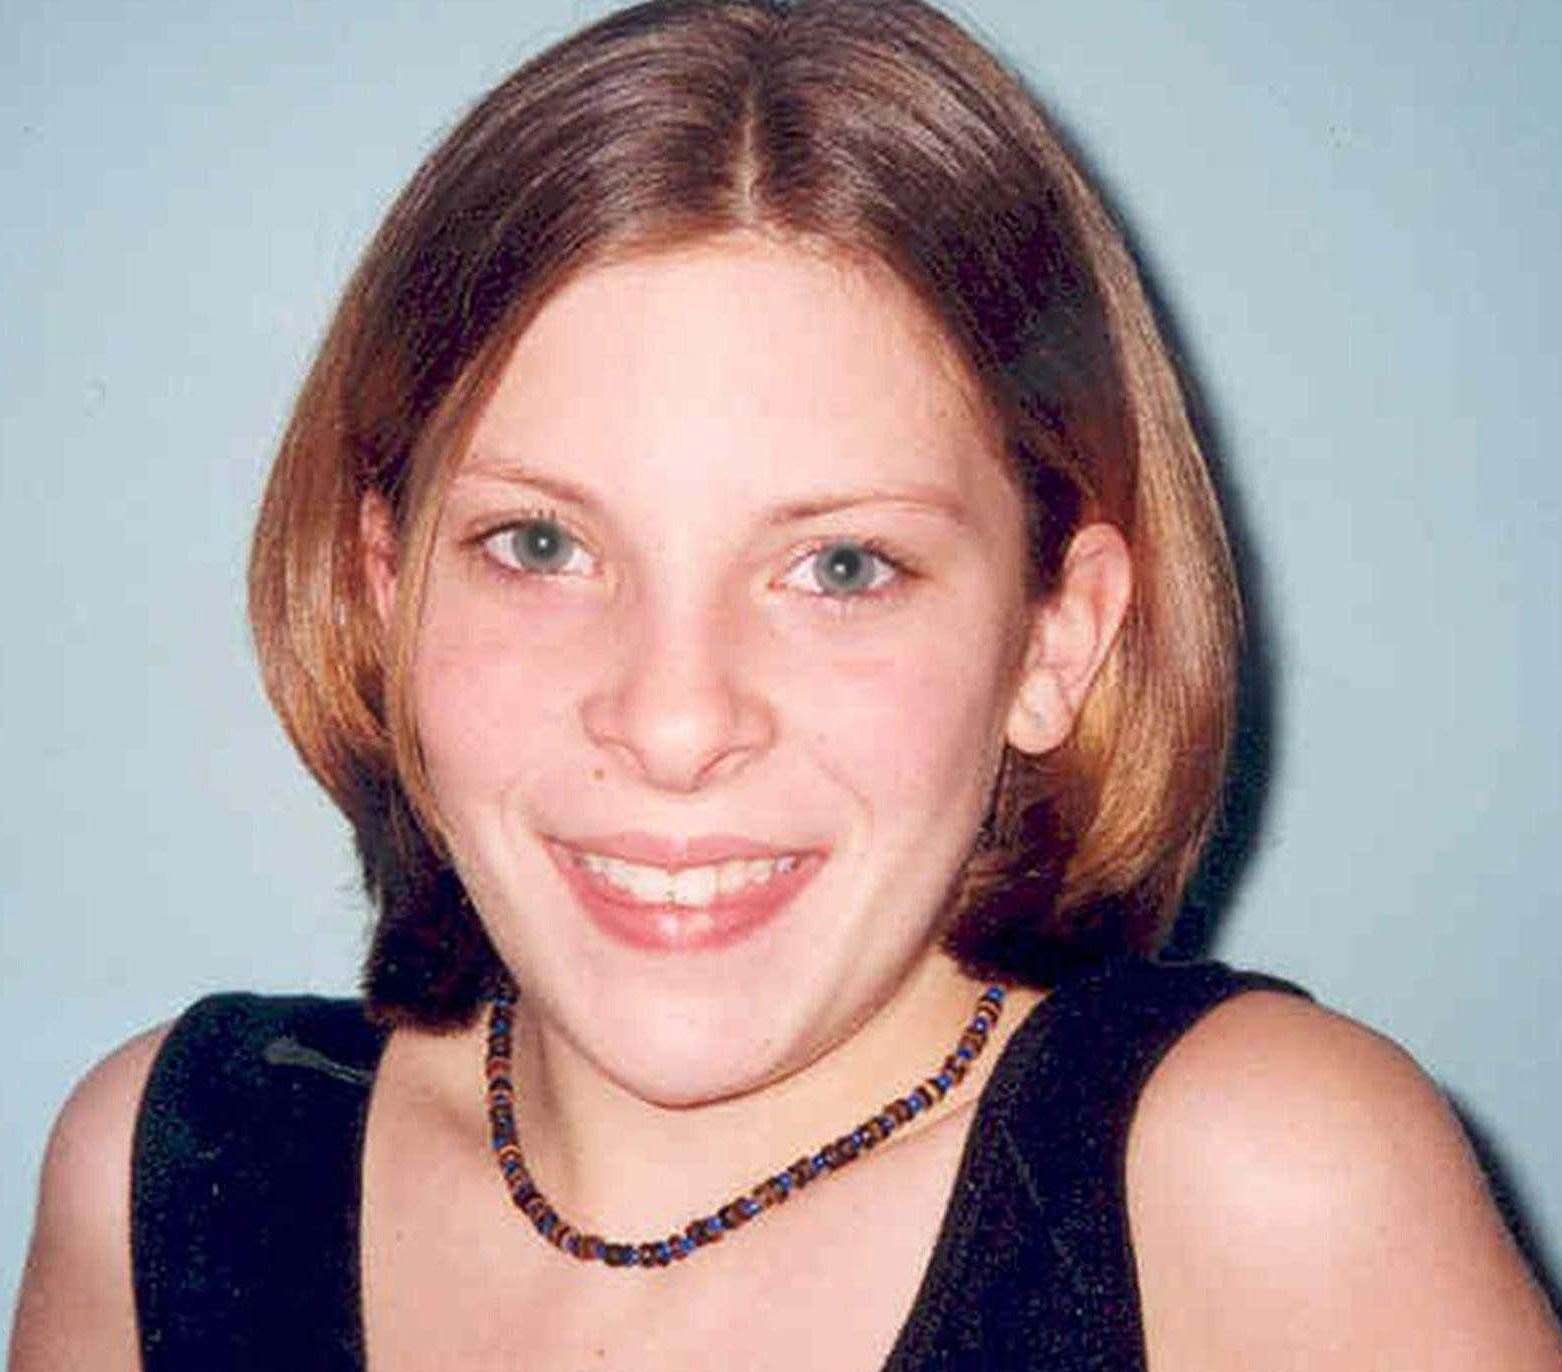 Levi Bellfield is serving life for the murder of 13-year-old Milly Dowler, and two other victims